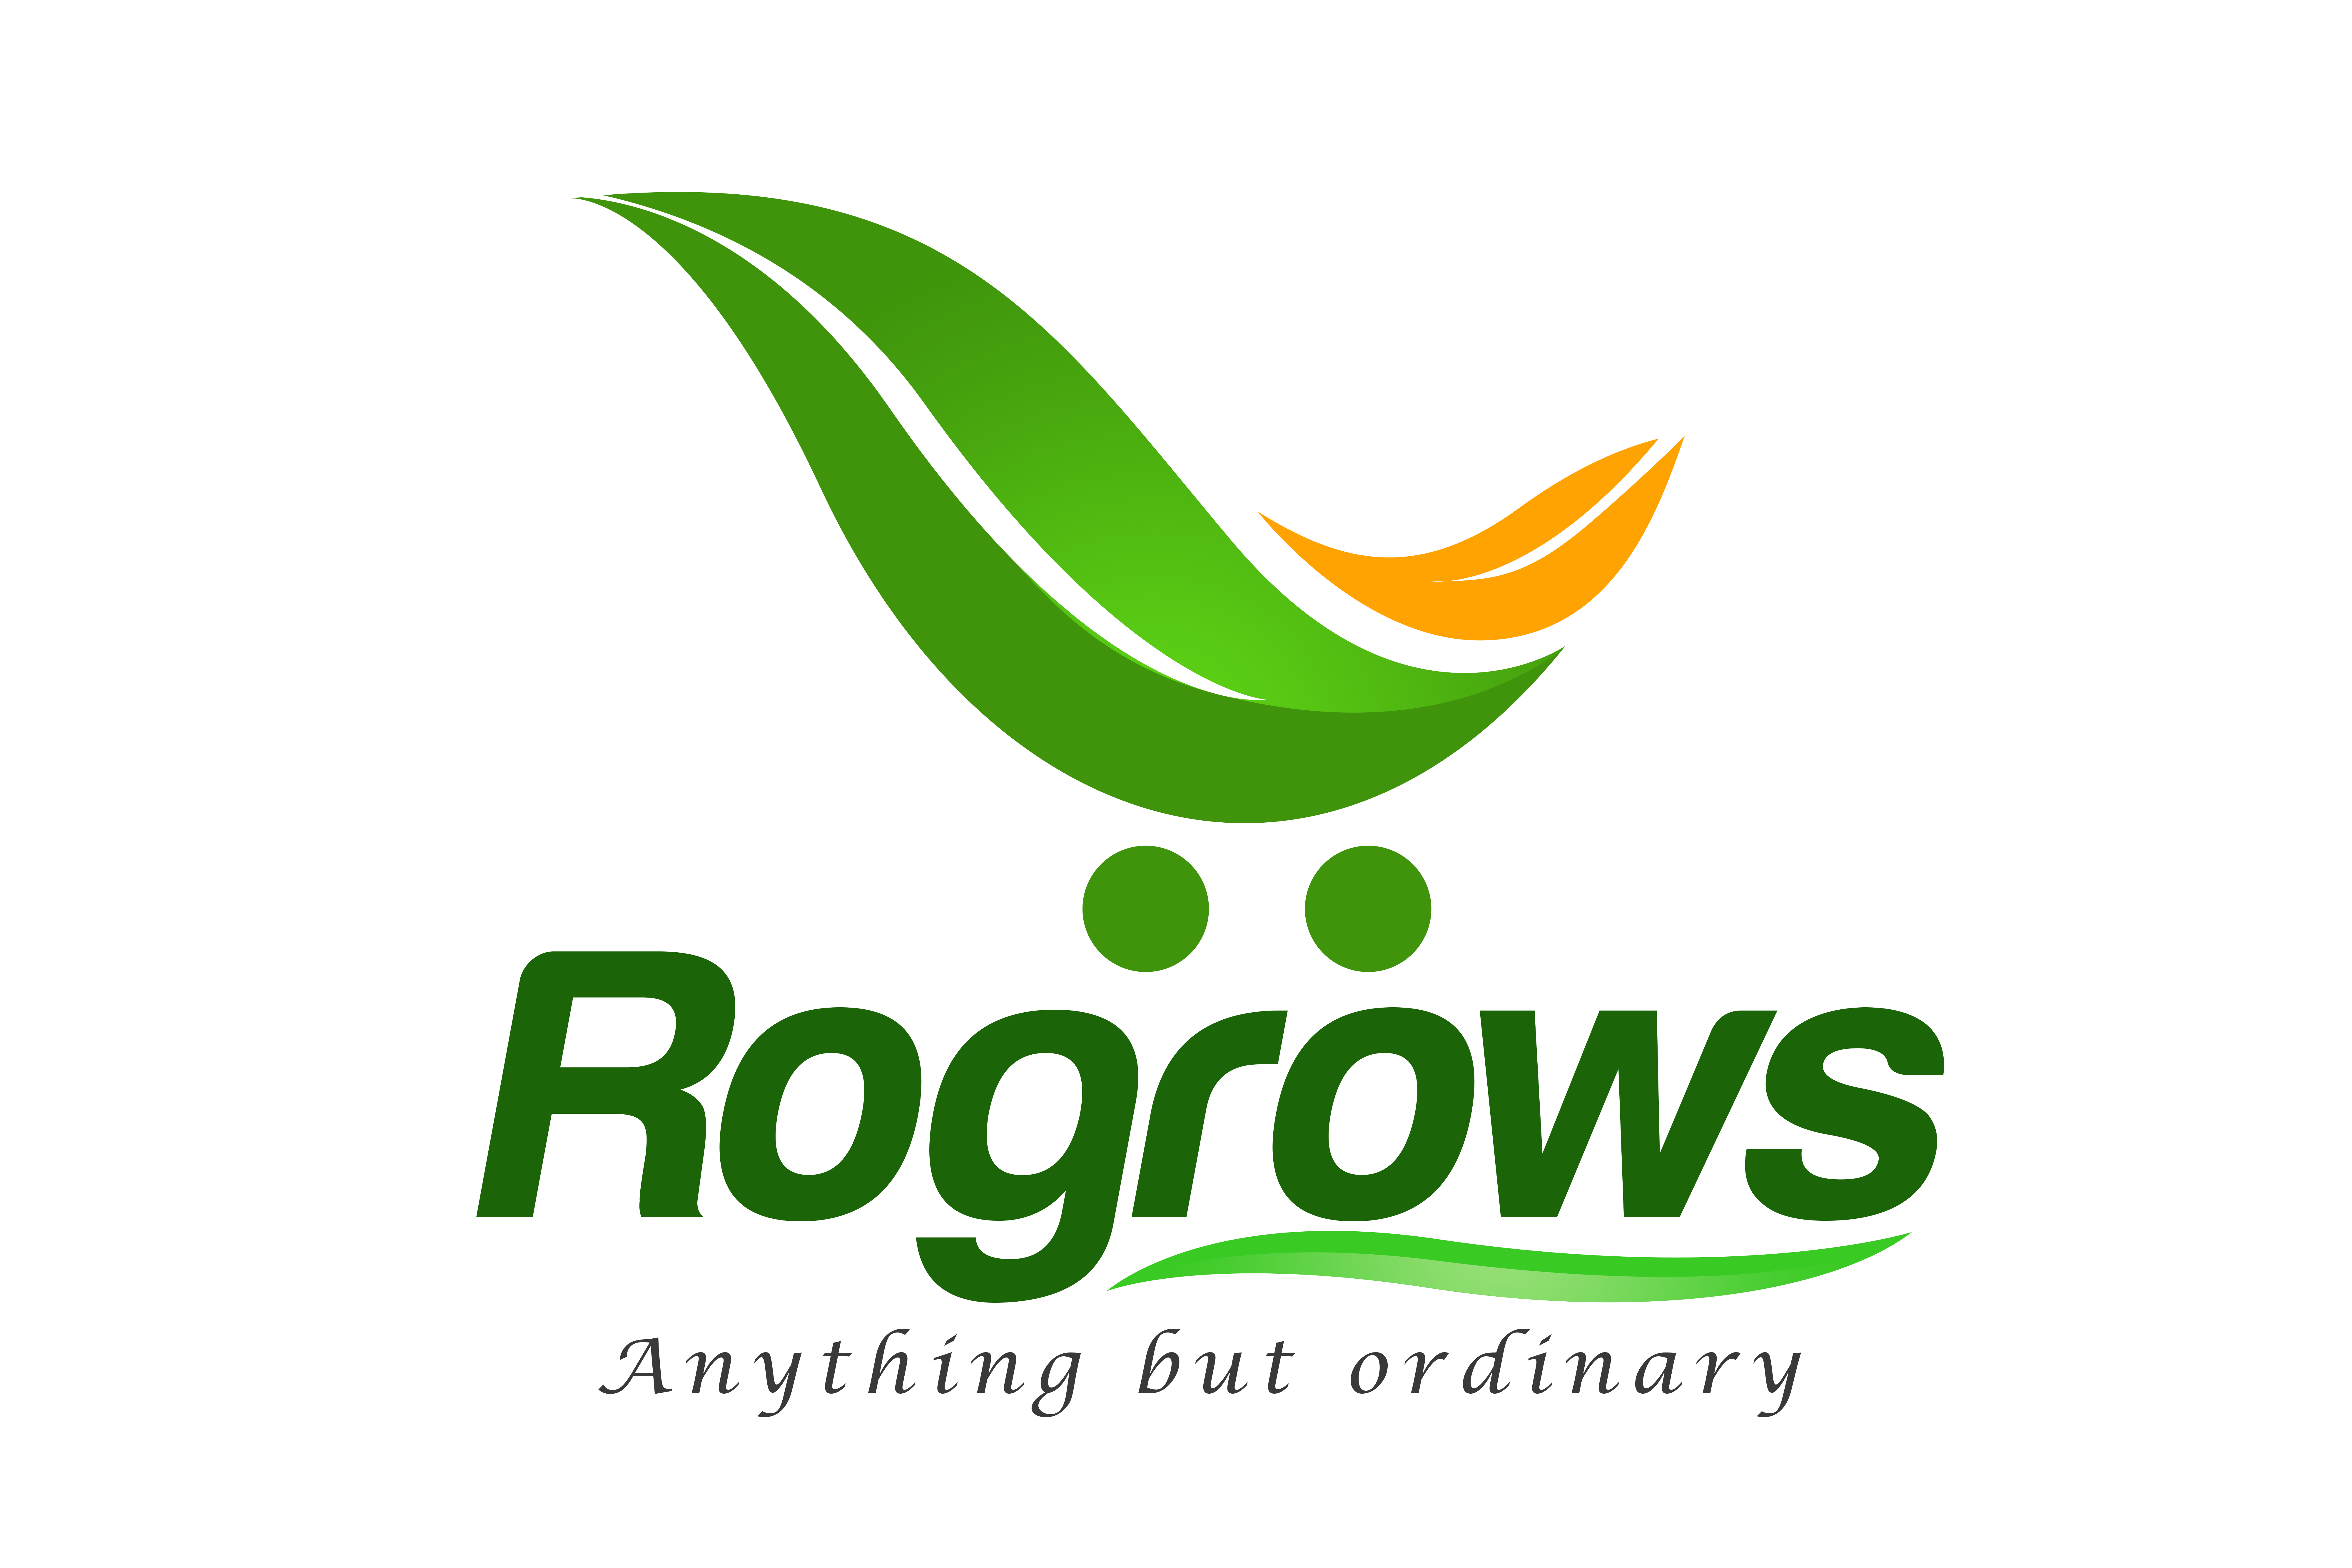 Swasoftech's client Rogrows